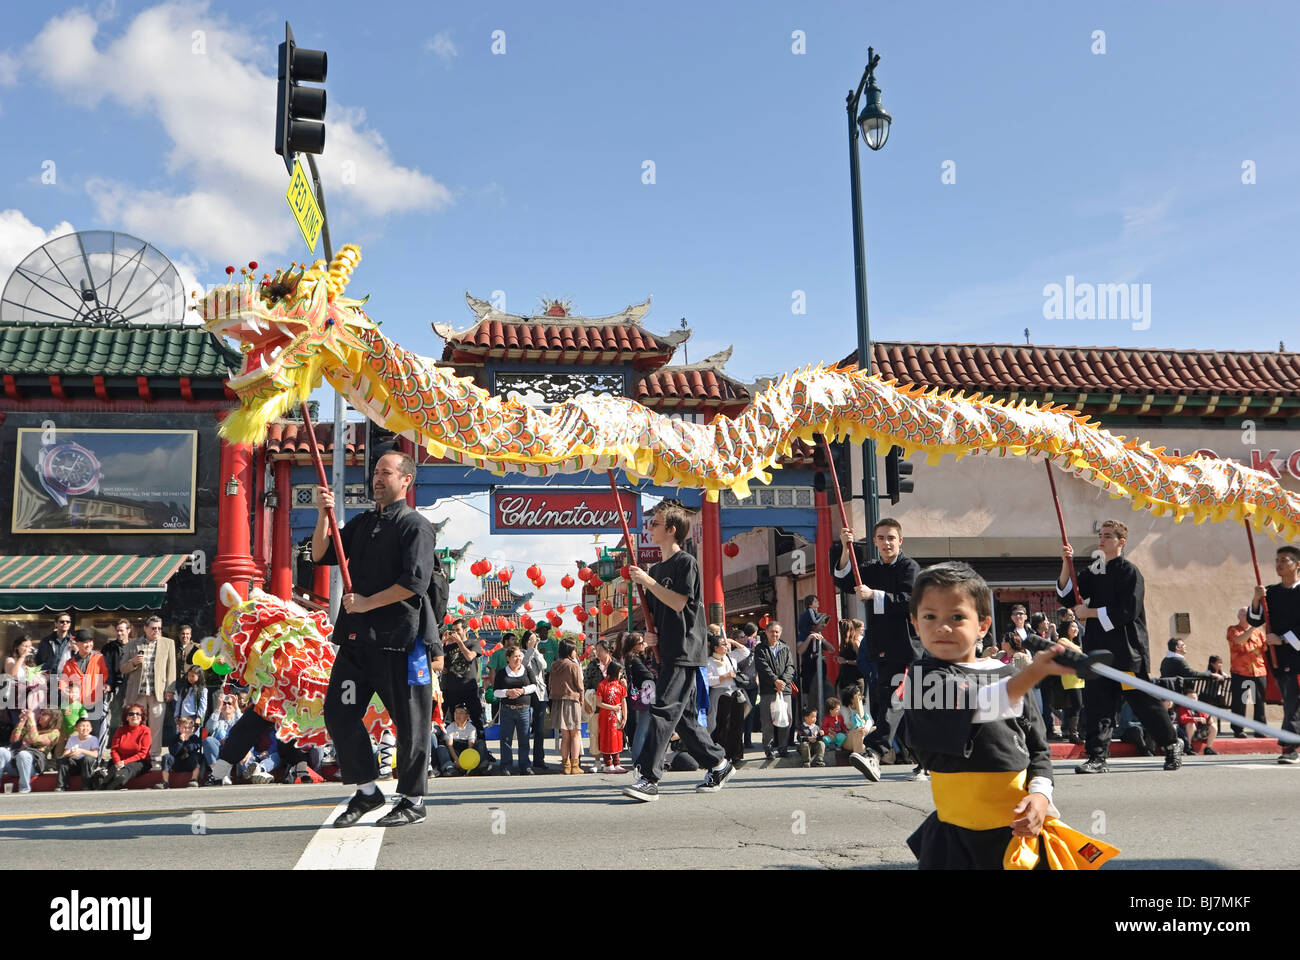 Chinese New Year parade in Chinatown of Los Angeles, California